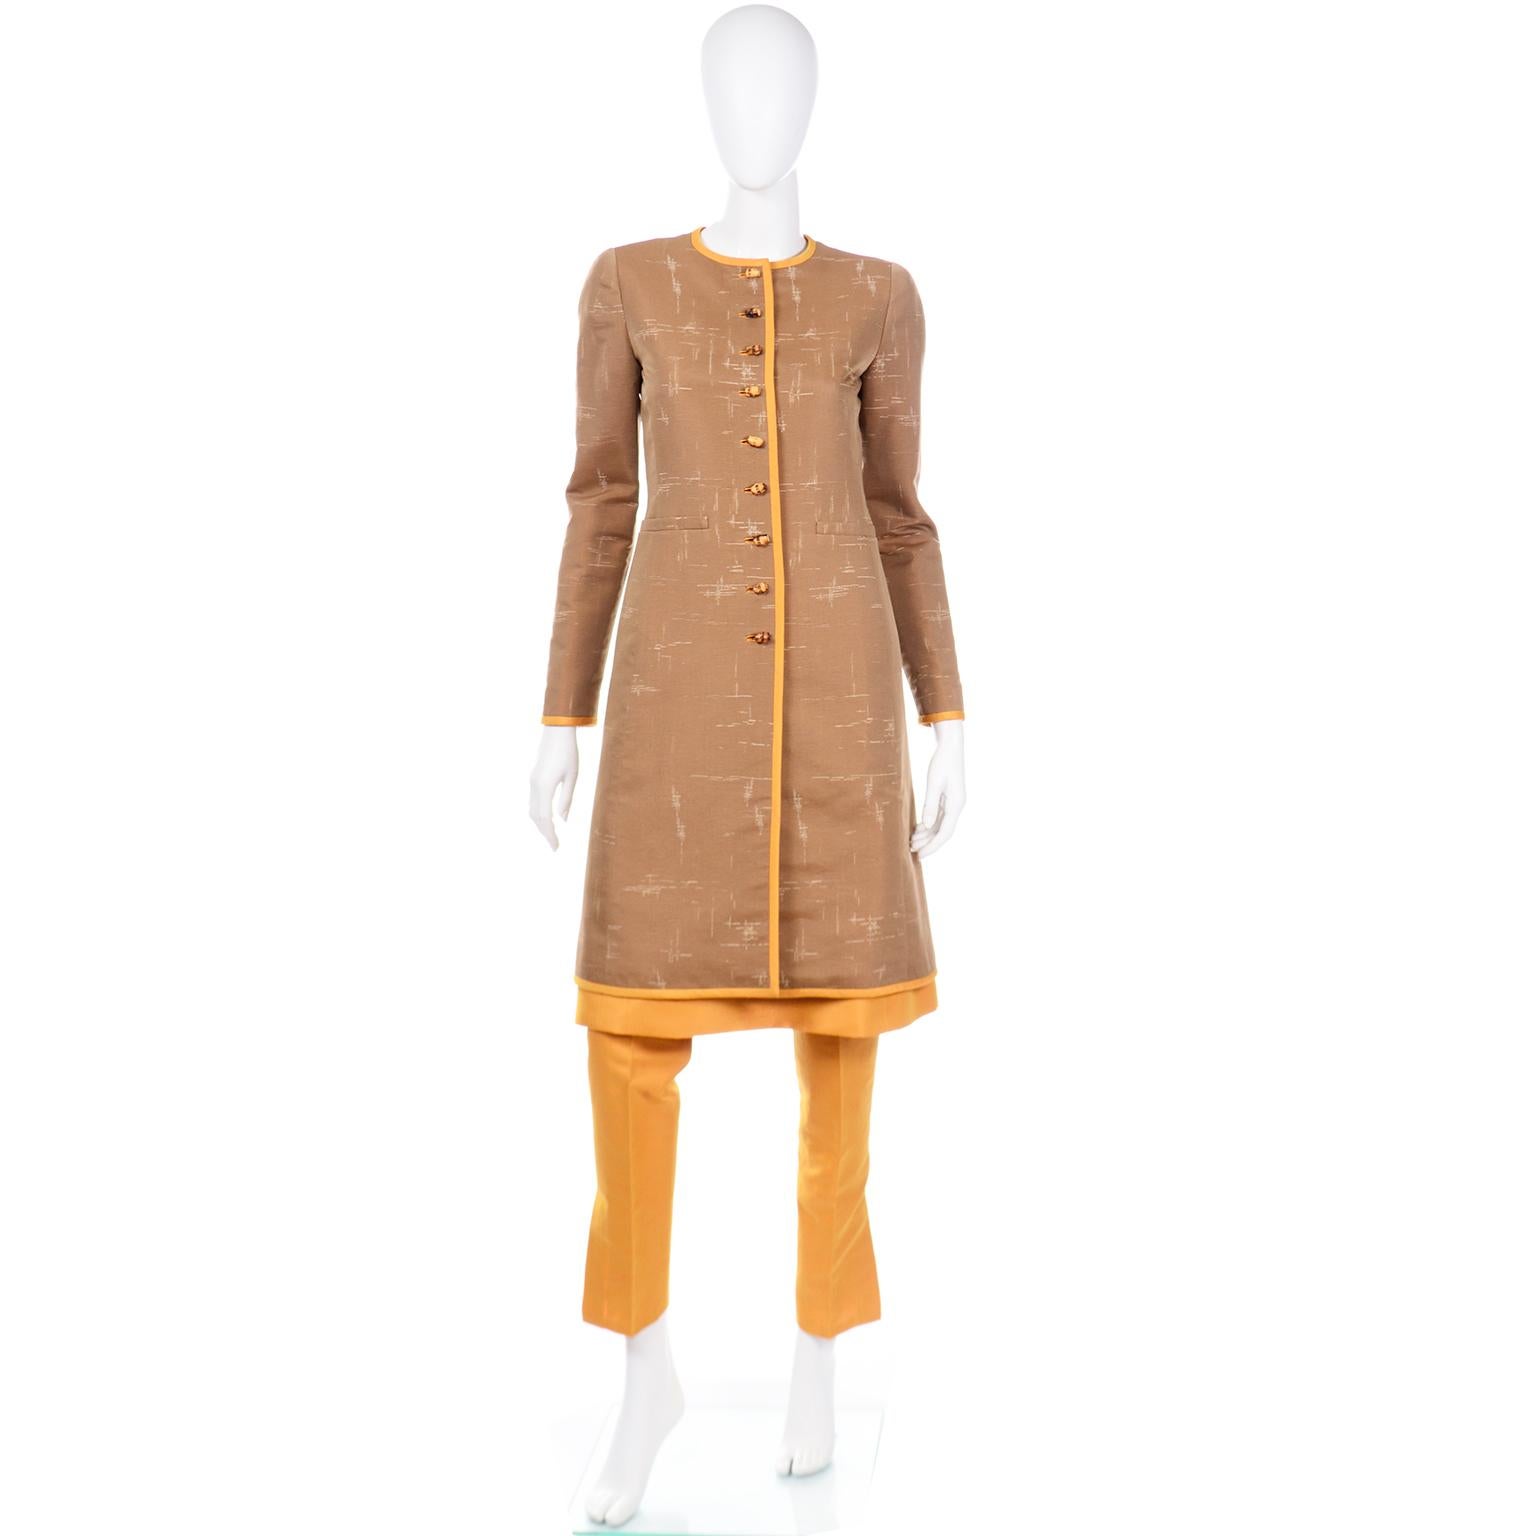 This 1960's inspired vintage 1990's Oscar de la Renta outfit includes 3 versatile separate pieces! You can wear them together or wear them separately, or with other pieces in your closet!
The ensemble comes with a gorgeous coat, a sheath dress and a